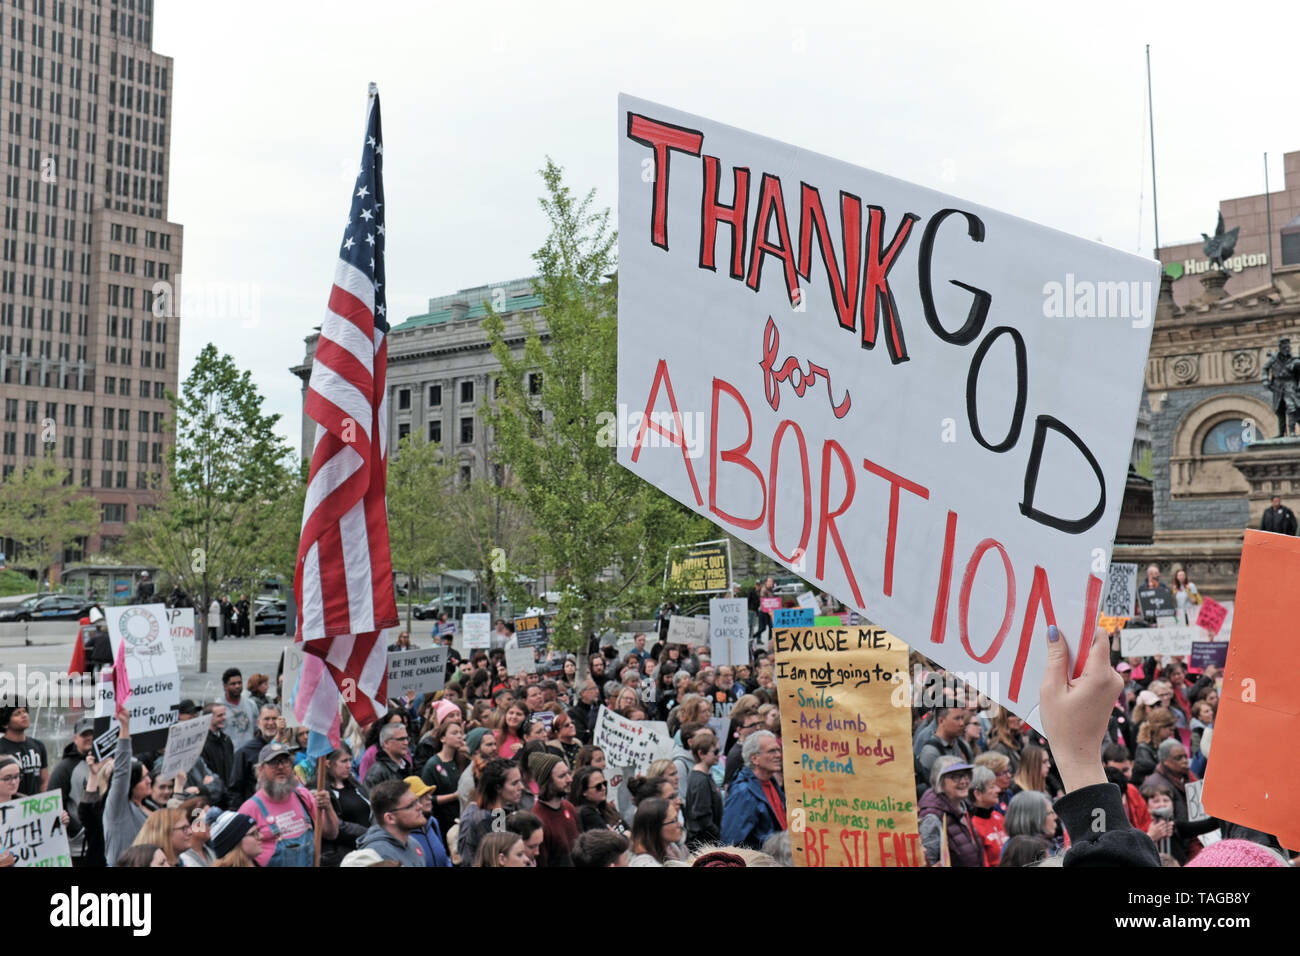 'Thank God for Abortion' is held up while a US flag is flown nearby during the 2019 Women's Rights Rally in Public Square of Cleveland, Ohio, USA. Stock Photo